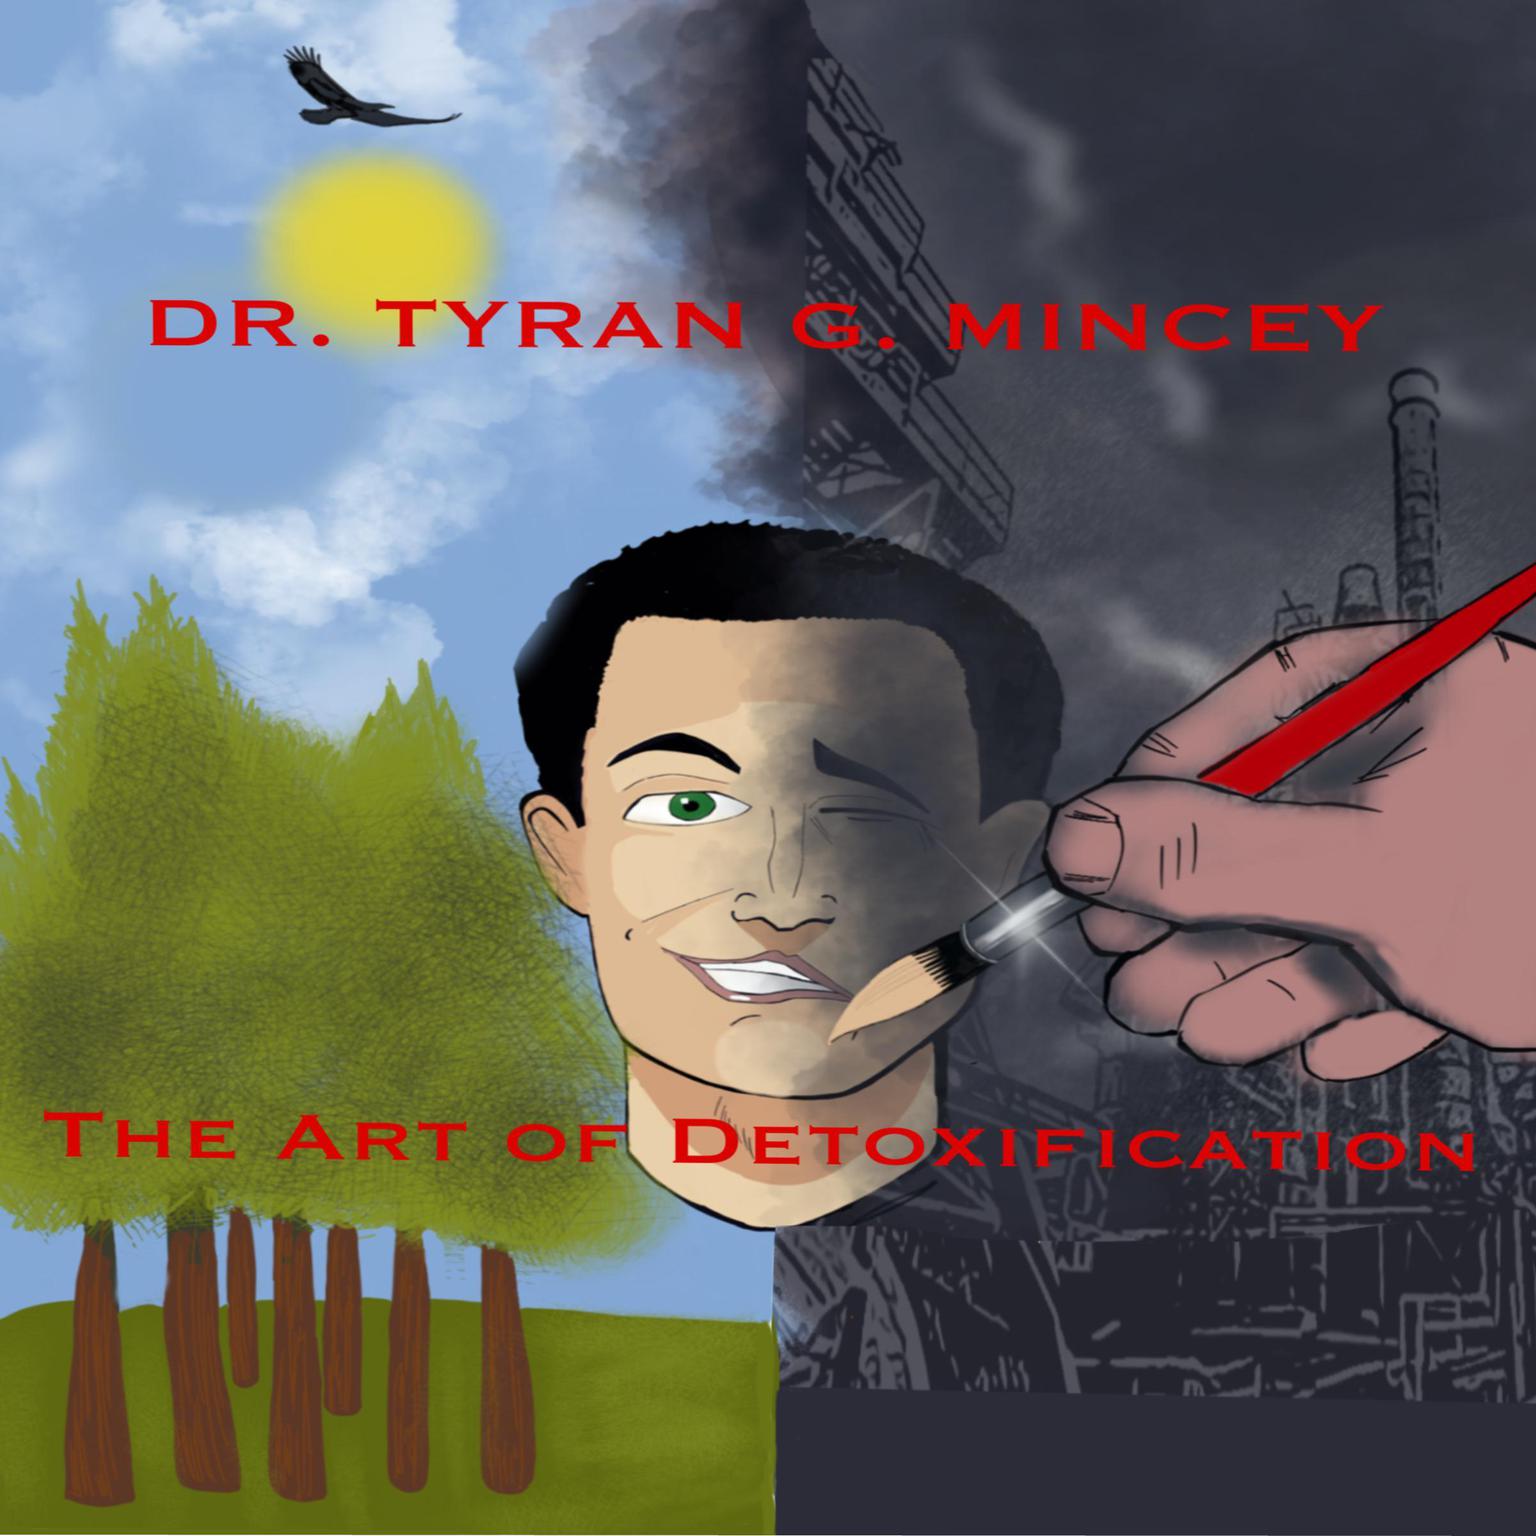 THE ART OF DETOXIFICATION. AN INTRODUCTION TO MAINTAINING HEALTH IN A TOXIC ENVIRONMENT: AN INTRODUCTION TO MAINTAINING HEALTH IN A TOXIC ENVIRONMENT Audiobook, by Dr Tyran Mincey